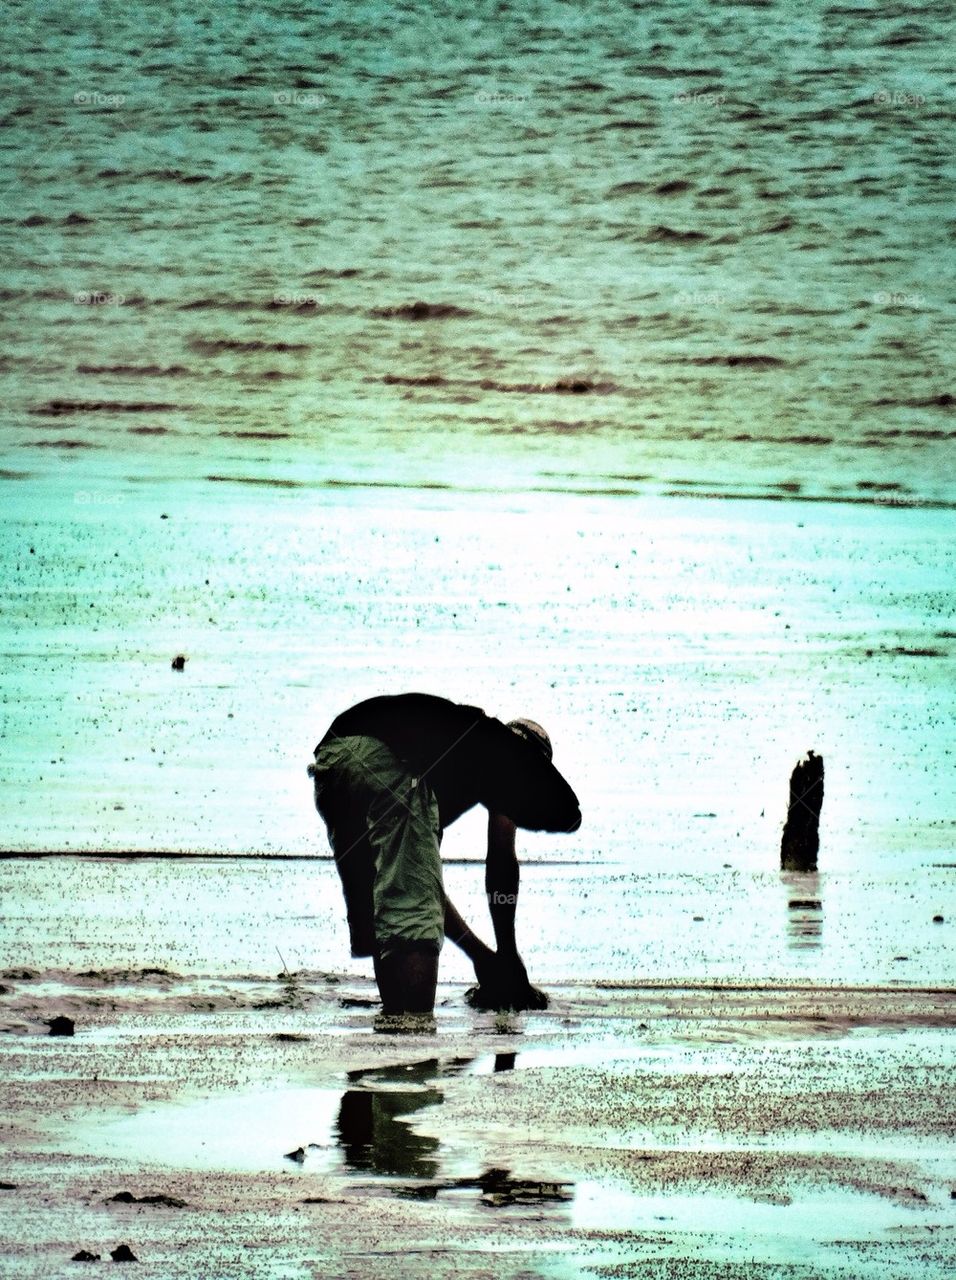 A man searching for clams